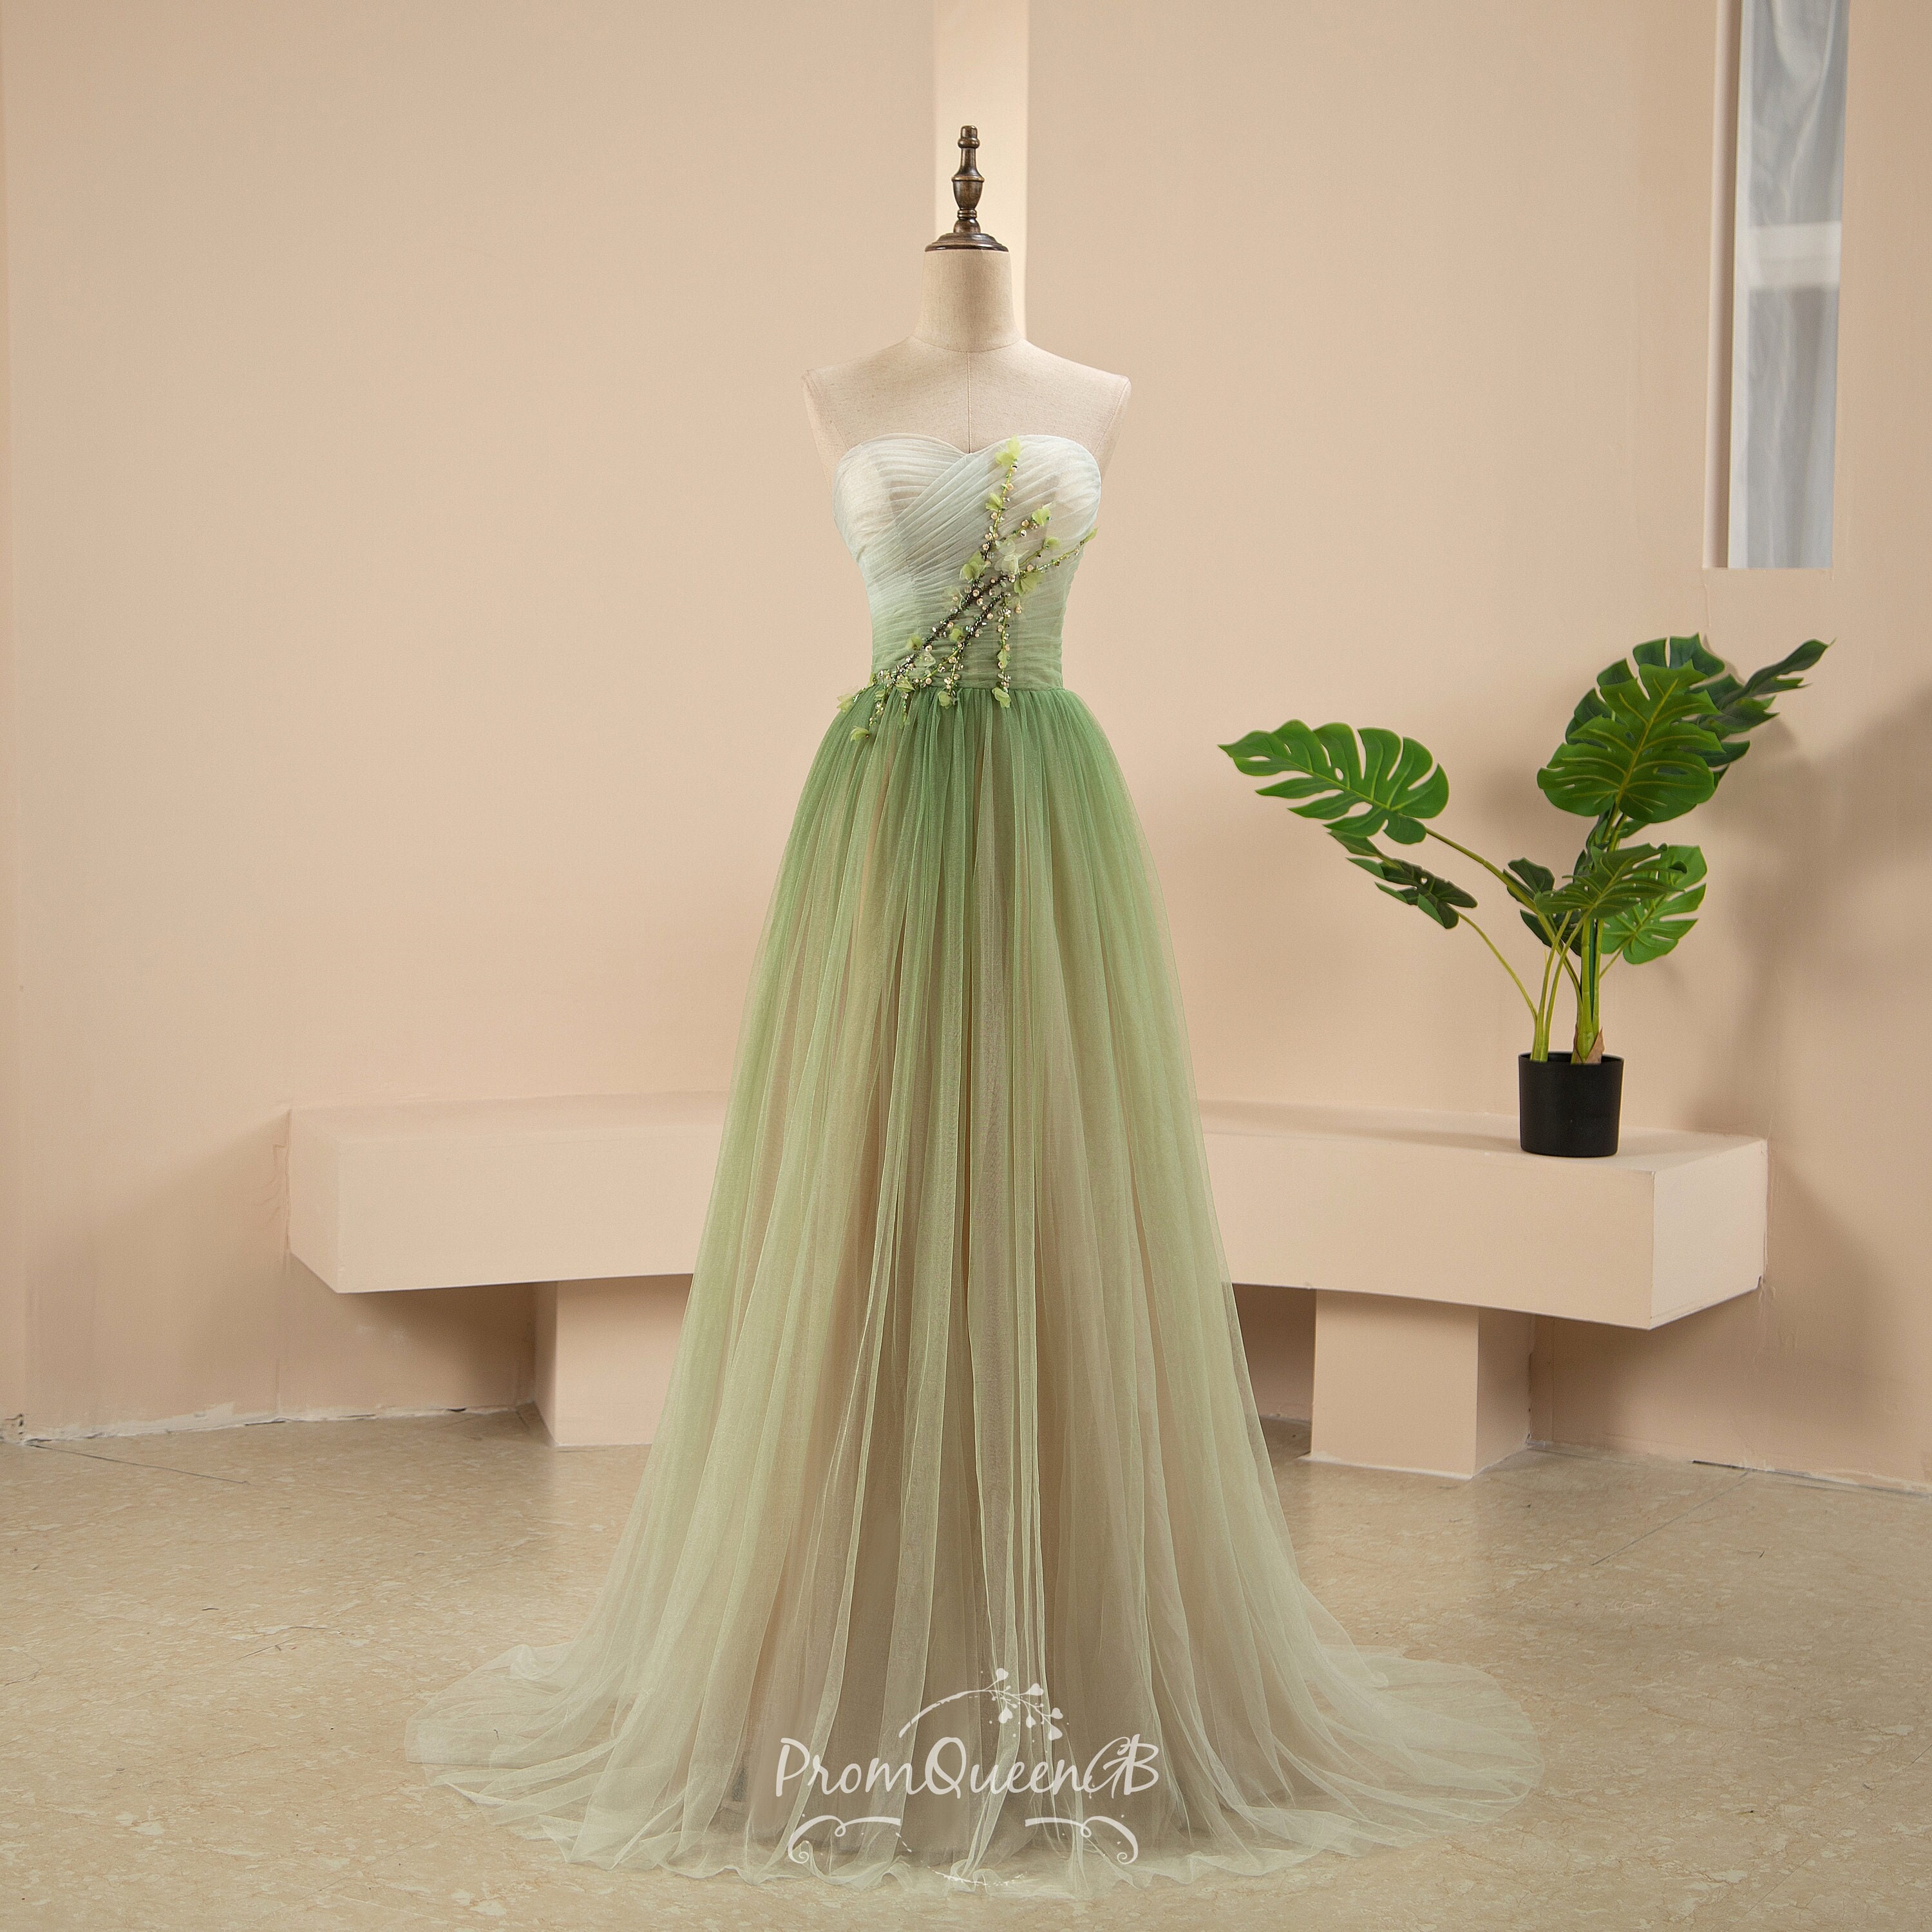 Green Mint Tulle Fairy Prom Ball Gown. Blue Turquoise Floral